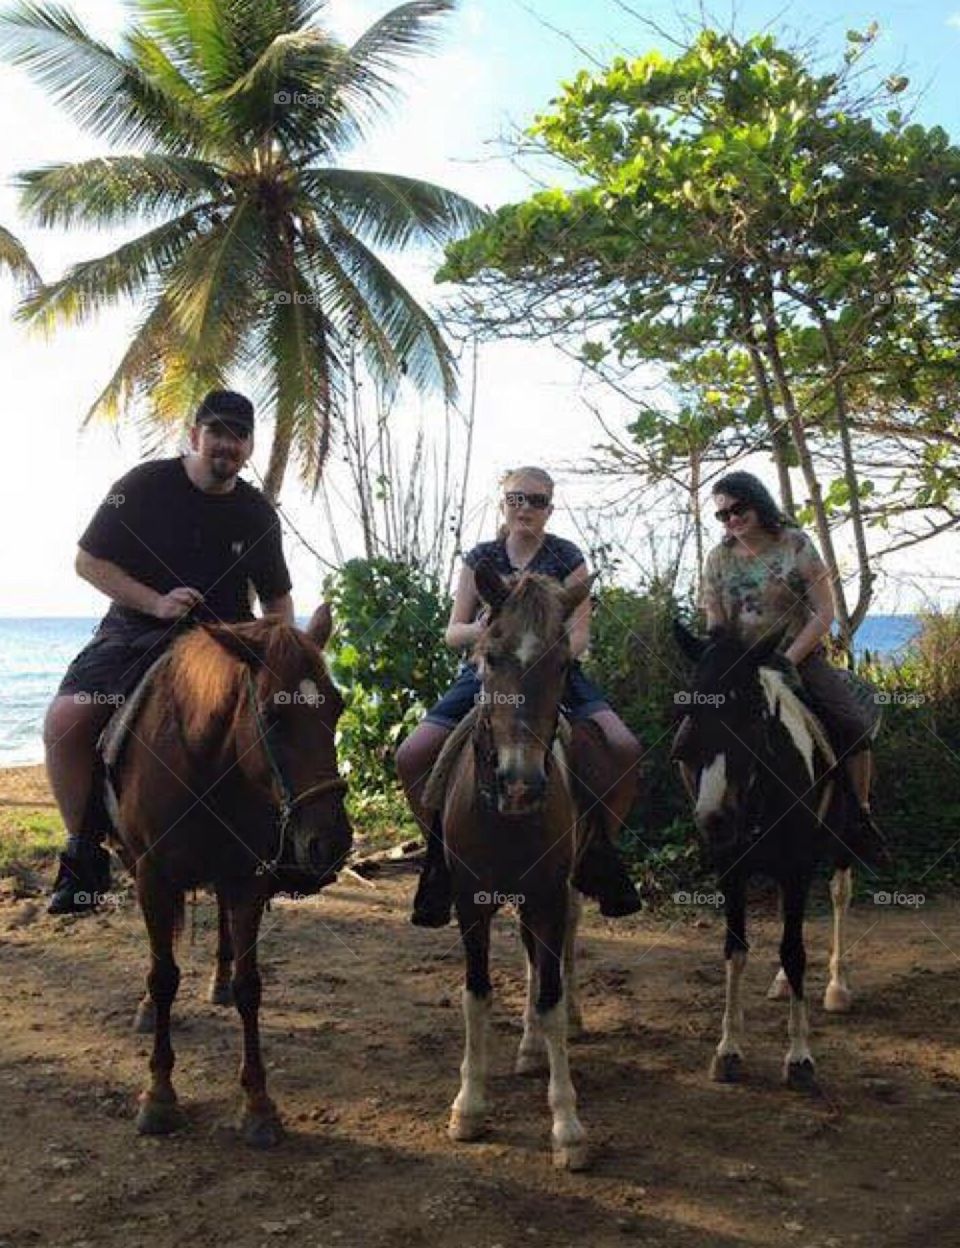 Horseback riding on the beach and amongst the Palm trees in Rincon, Puerto Rico. 